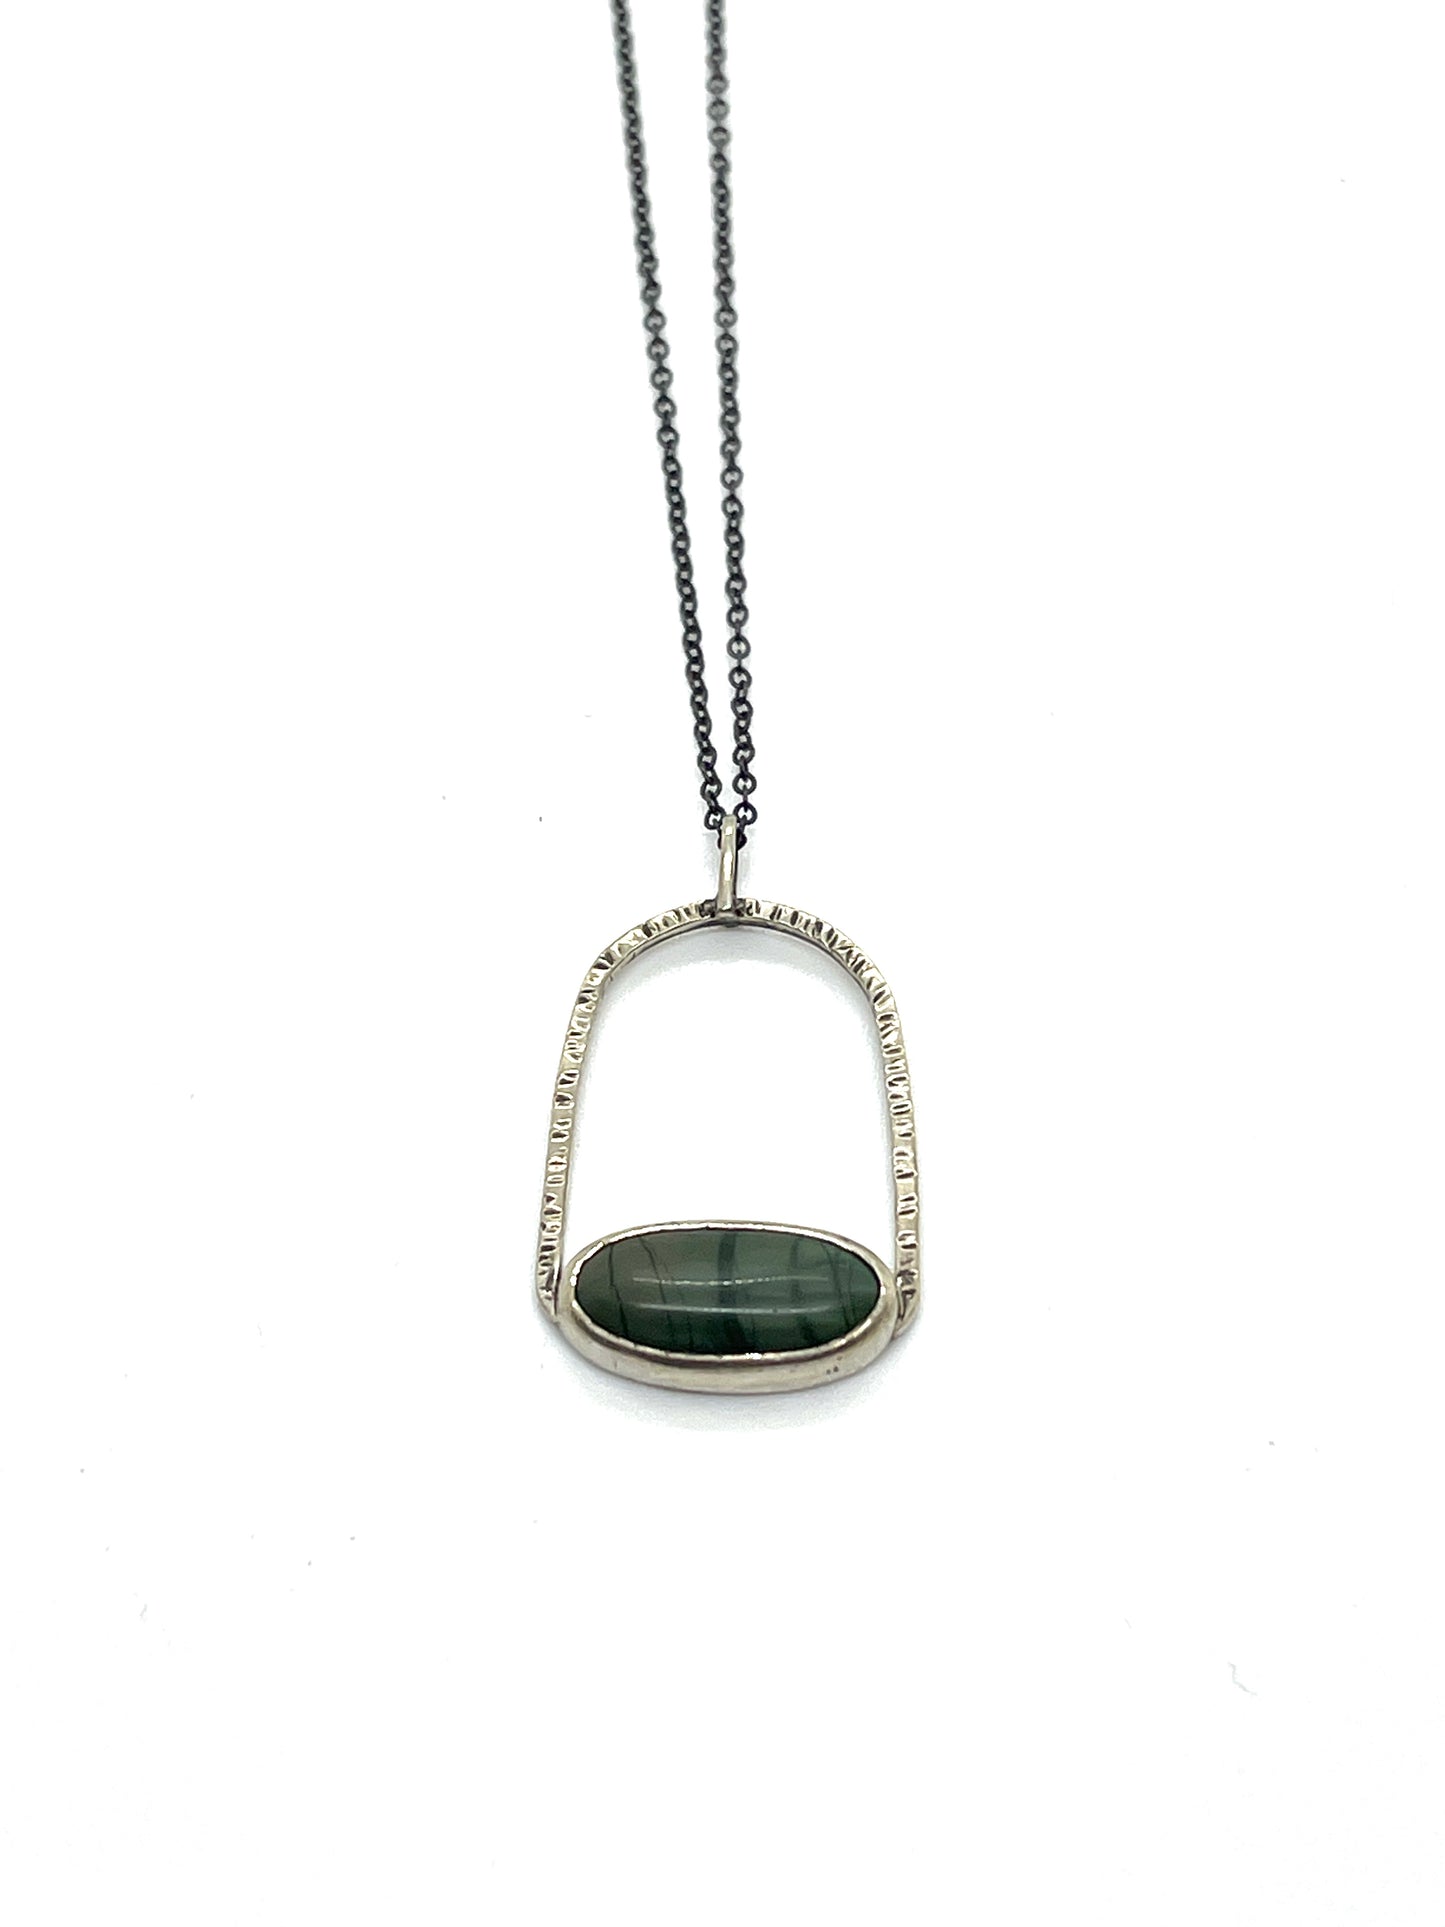 Green imperial jasper (green w/ striping) and oxidized sterling silver necklace